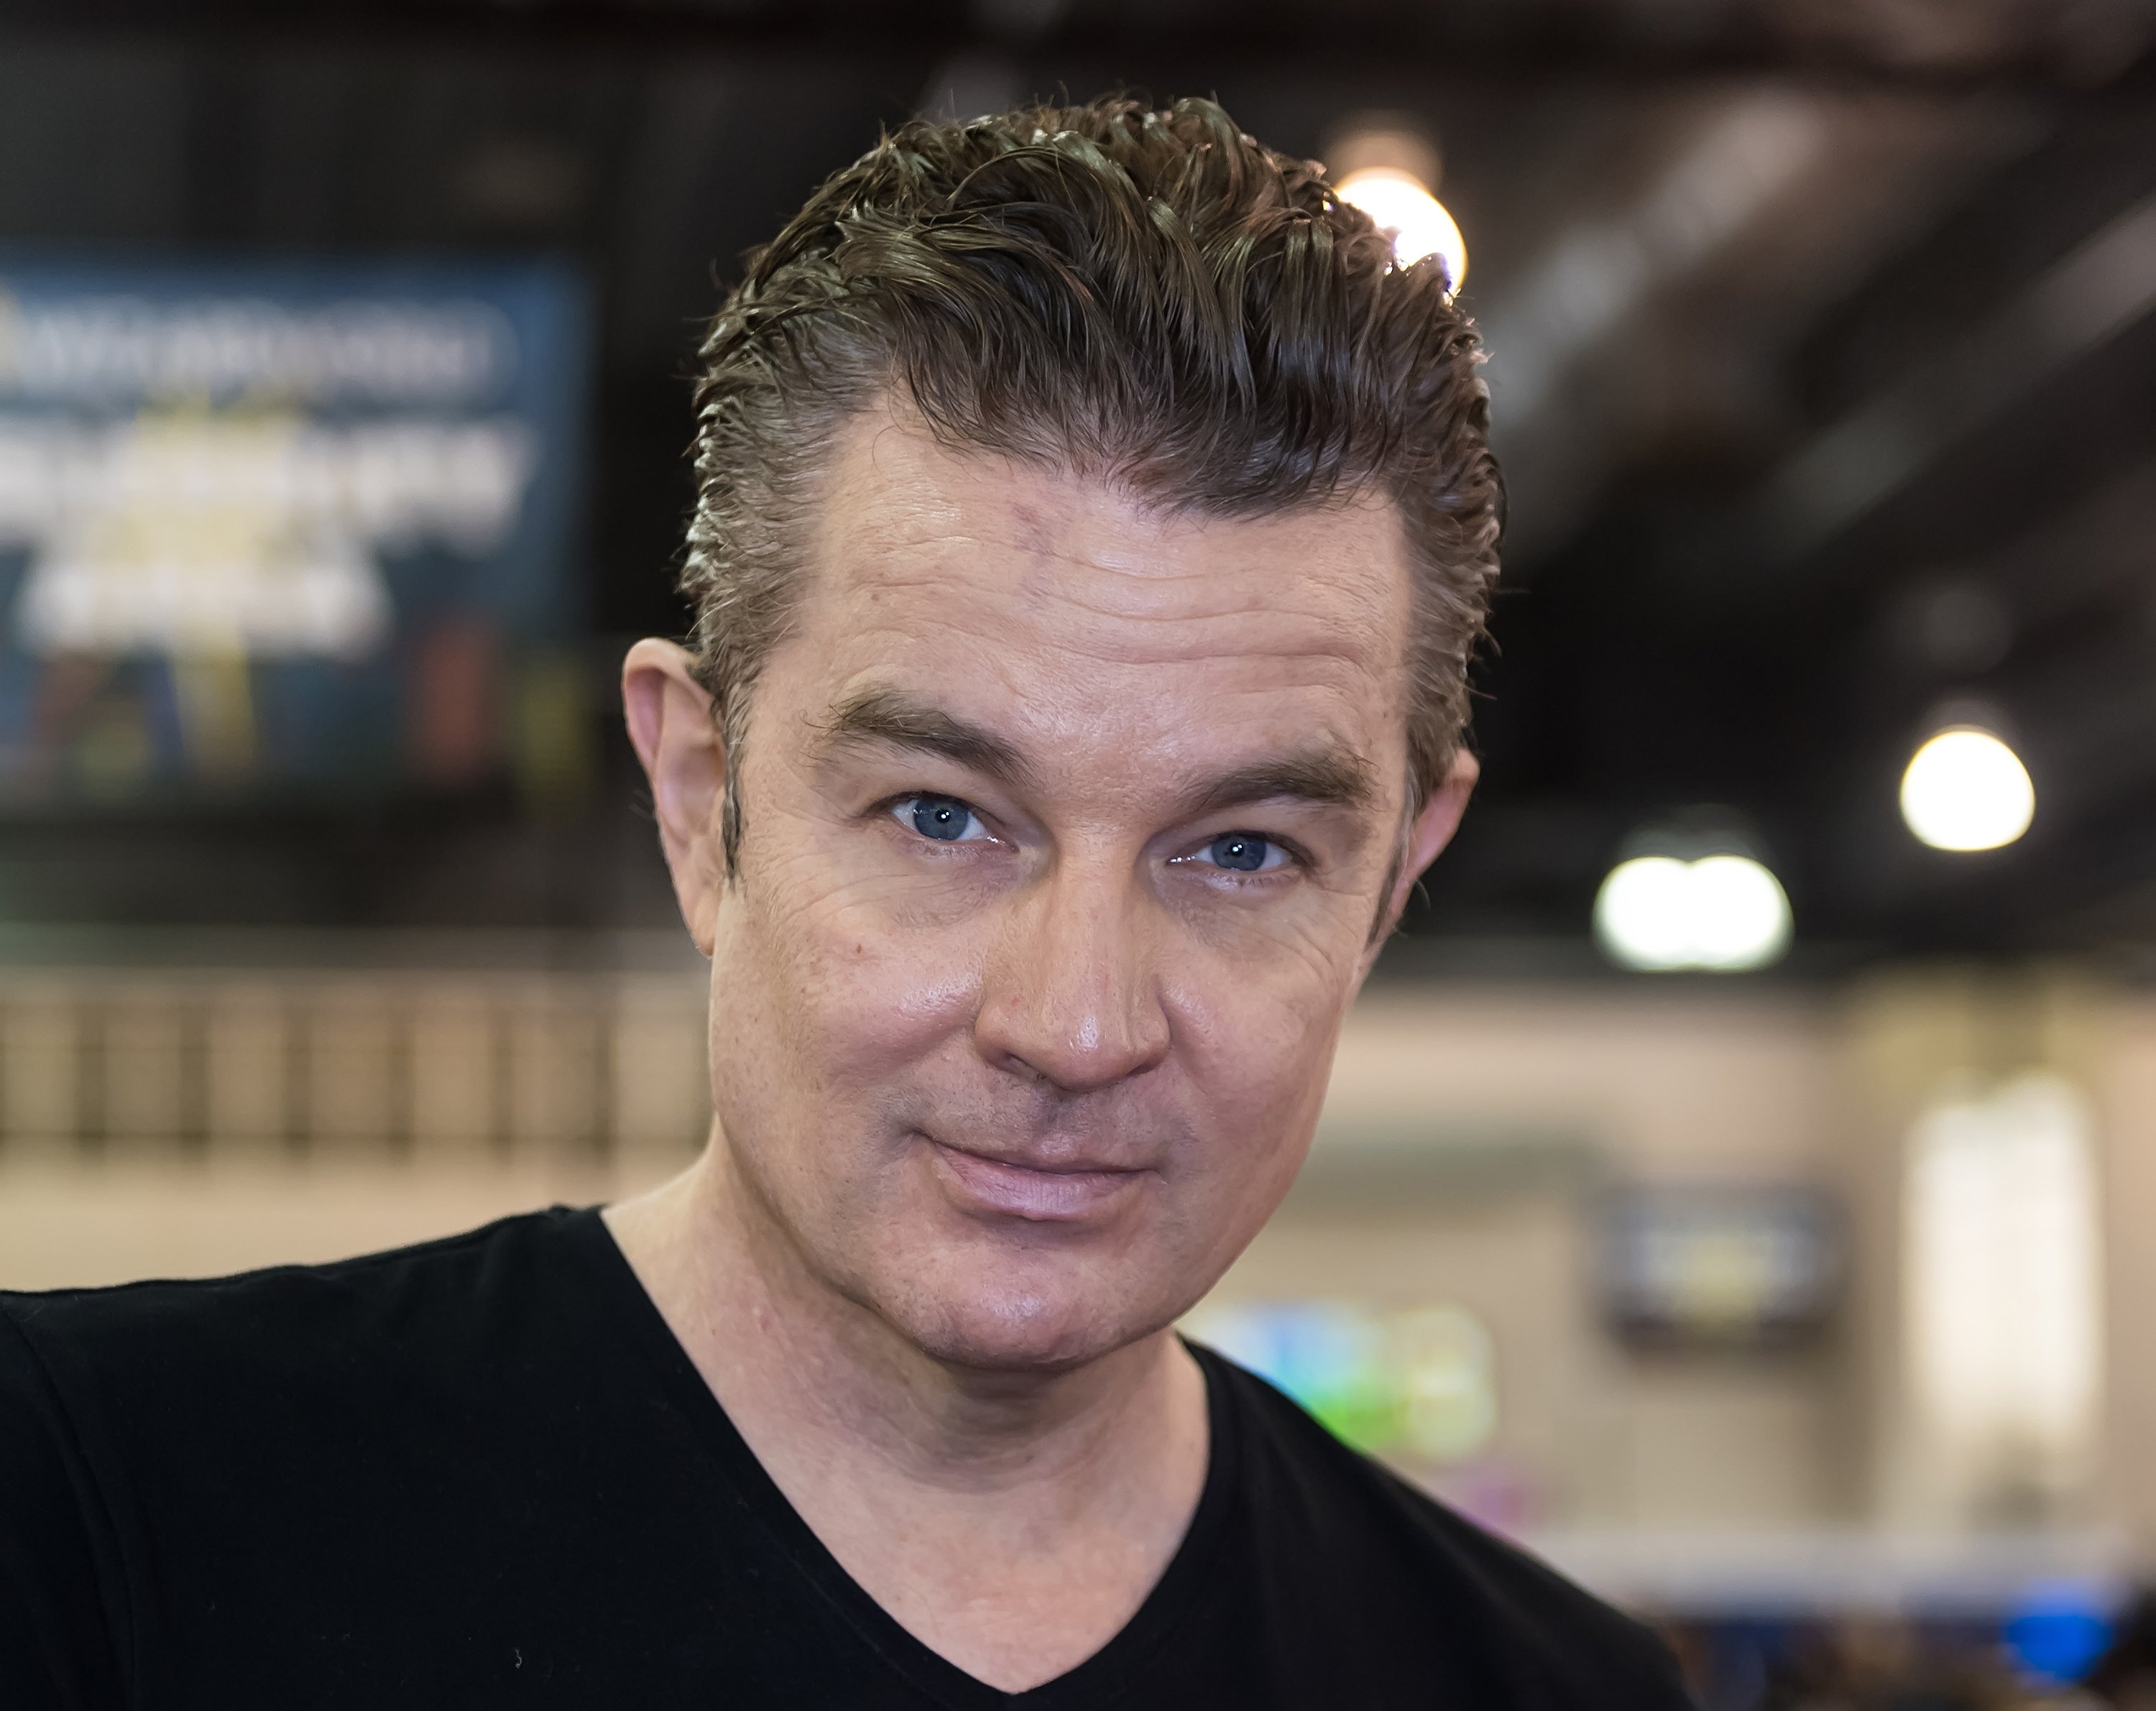 James Marsters attends the Wizard World Comic Con in Philadelphia on June 2, 2017 | Photo: Getty Images